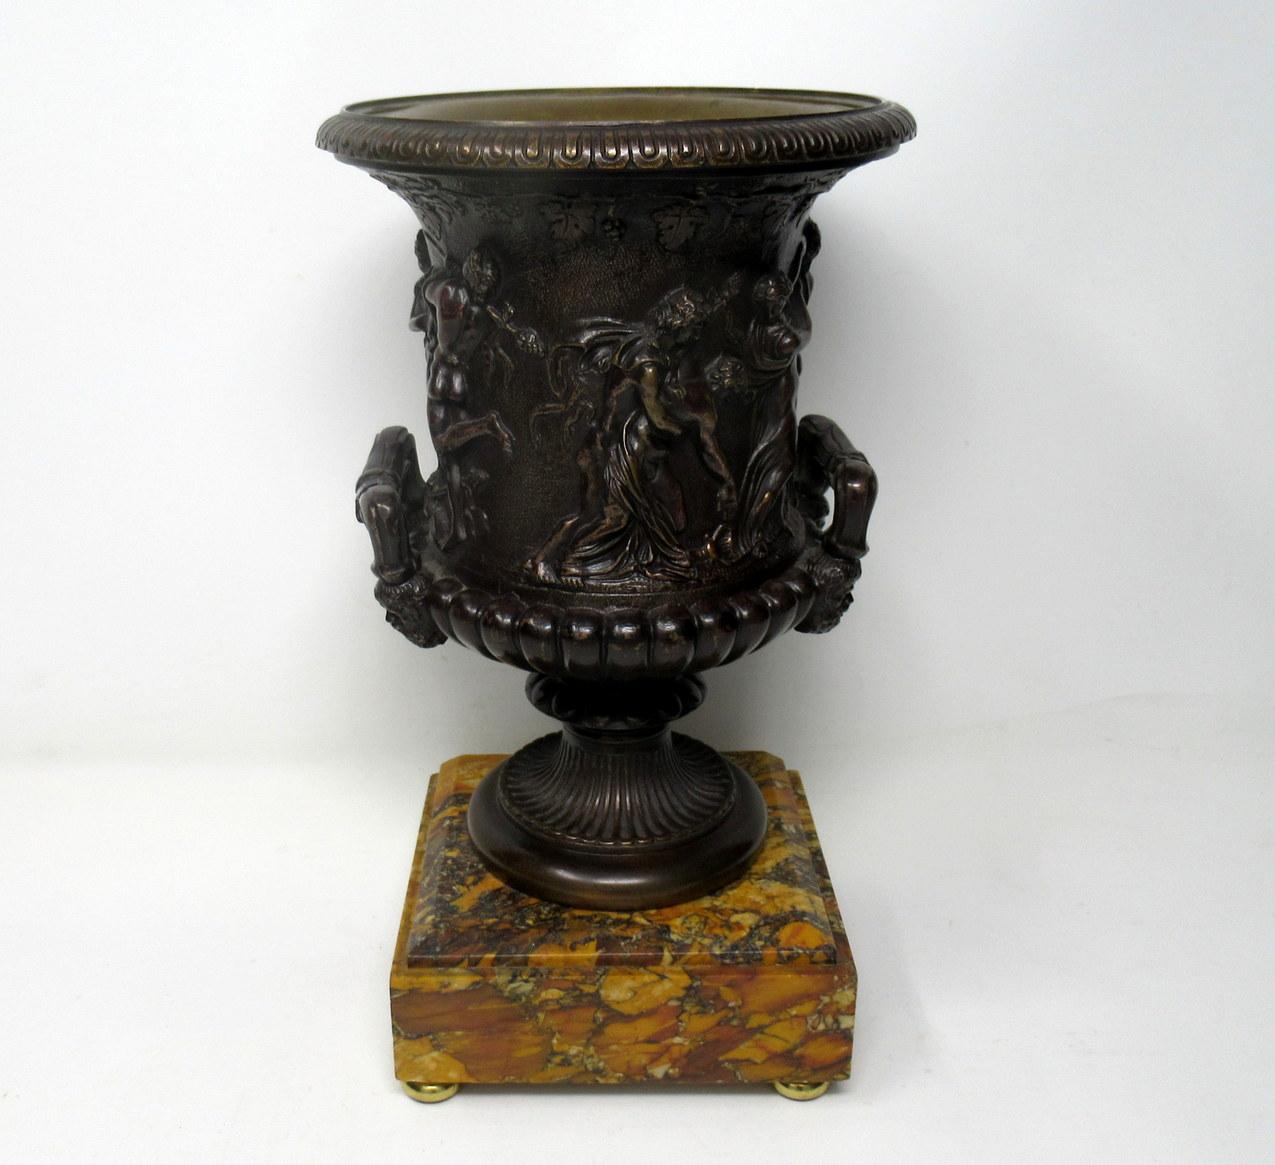 A fine and well cast example of an Italian grand tour patinated bronze relief cast model of the Medici twin handle vase, after the antique Bennedetto Boschetti Foundry, 74 Via Condotti, Rome, active 1820-1870, early to mid-19th century, raised on an